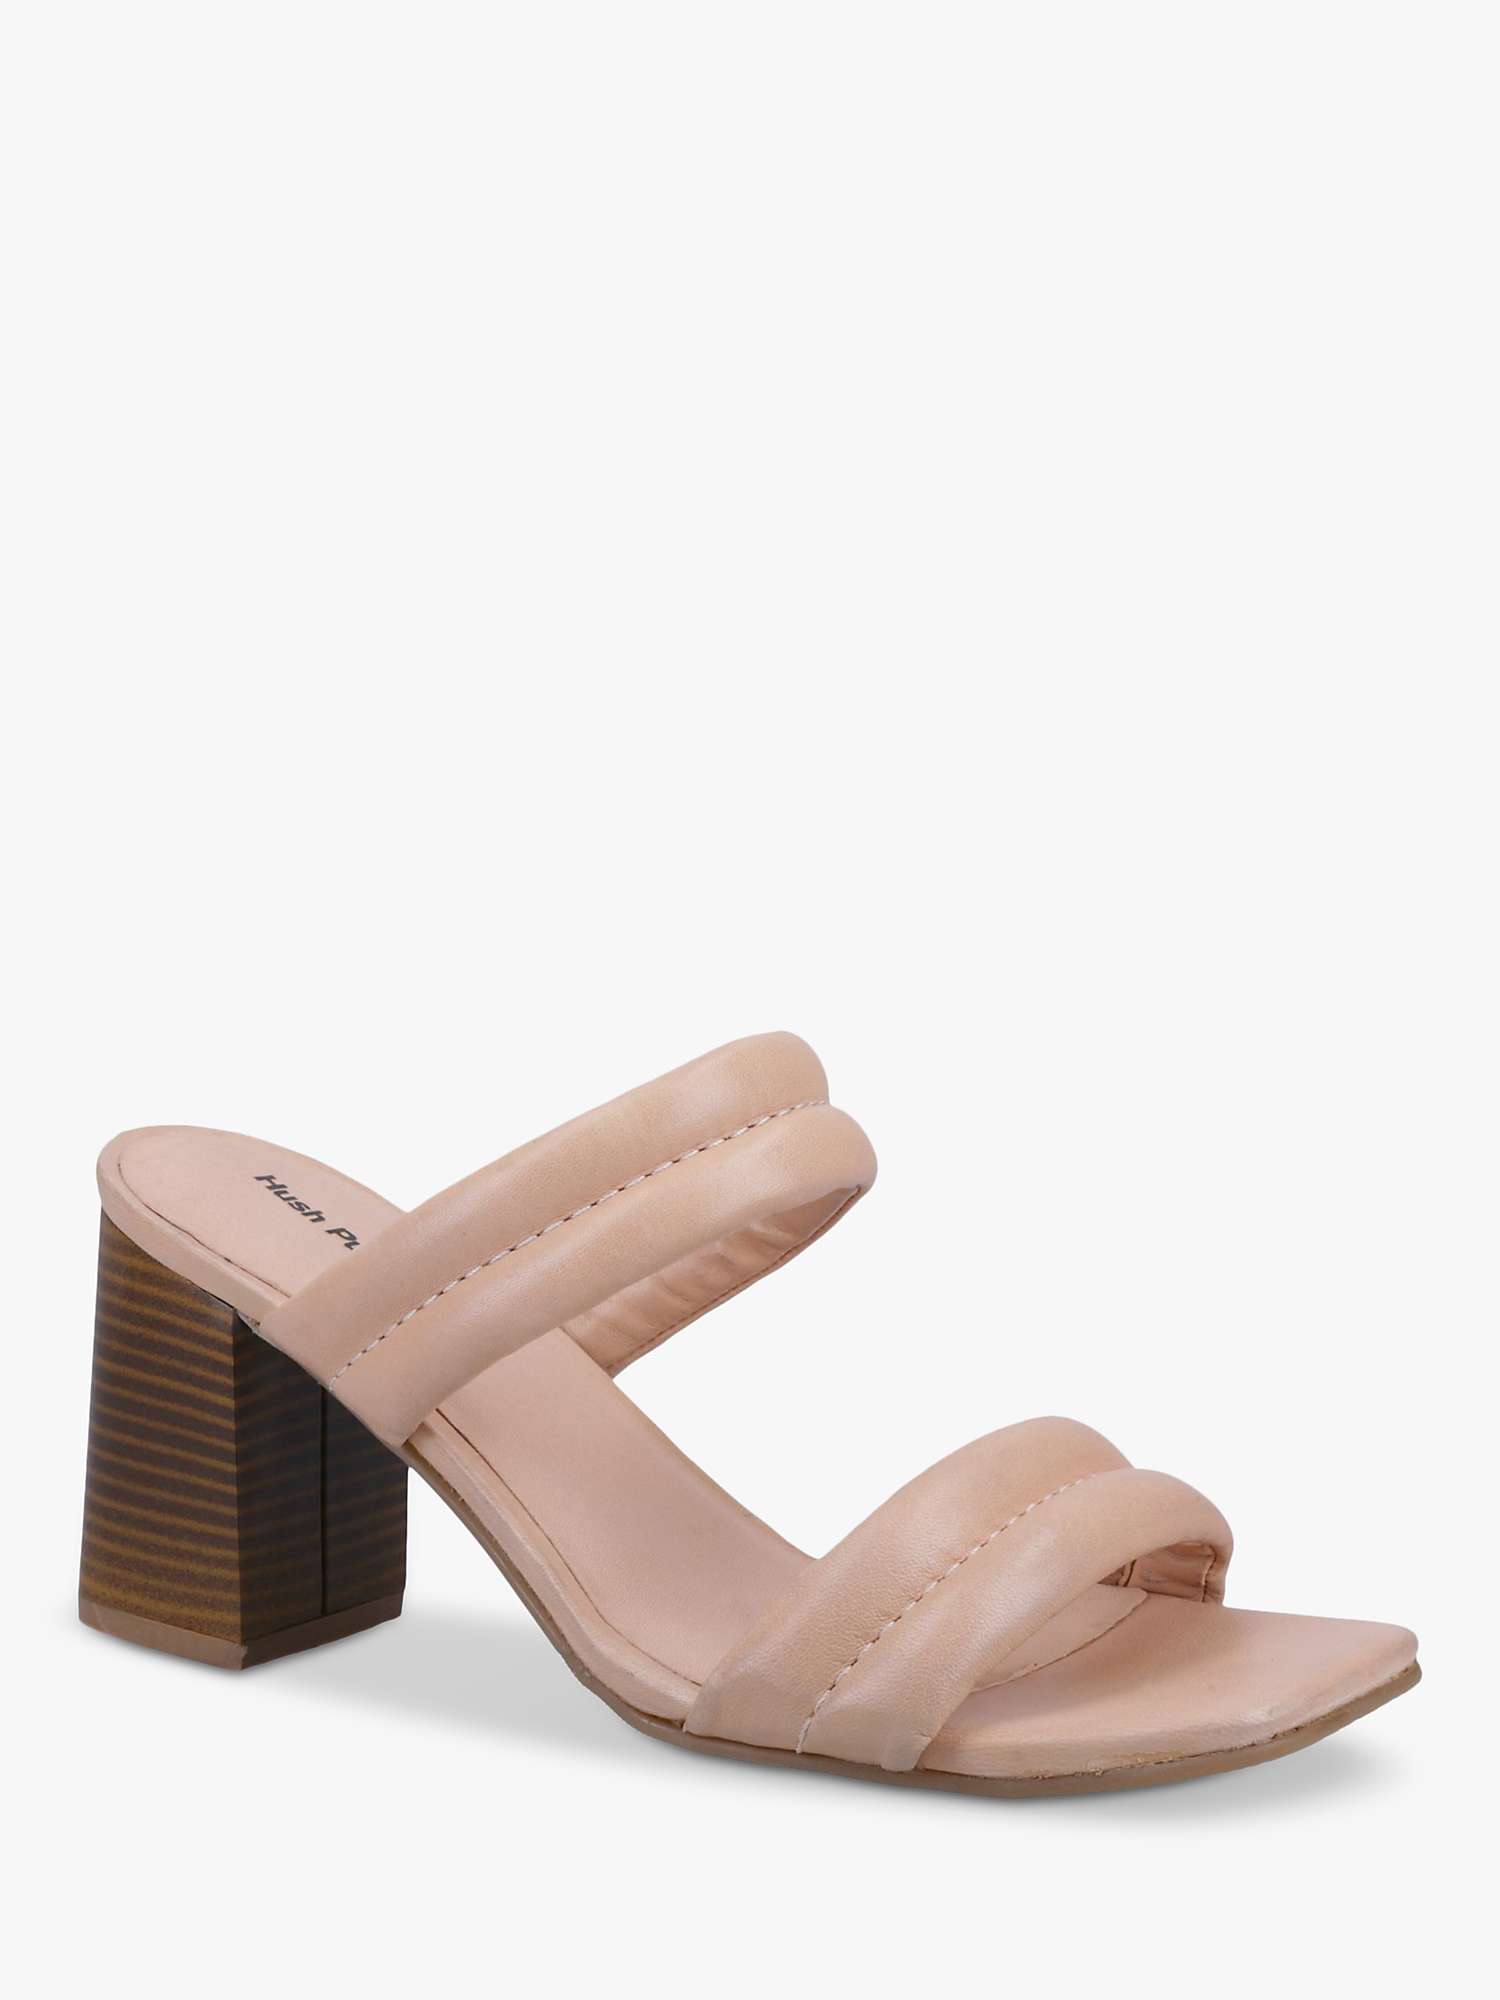 Buy Hush Puppies Katie Leather Heeled Sandals, Blush Online at johnlewis.com